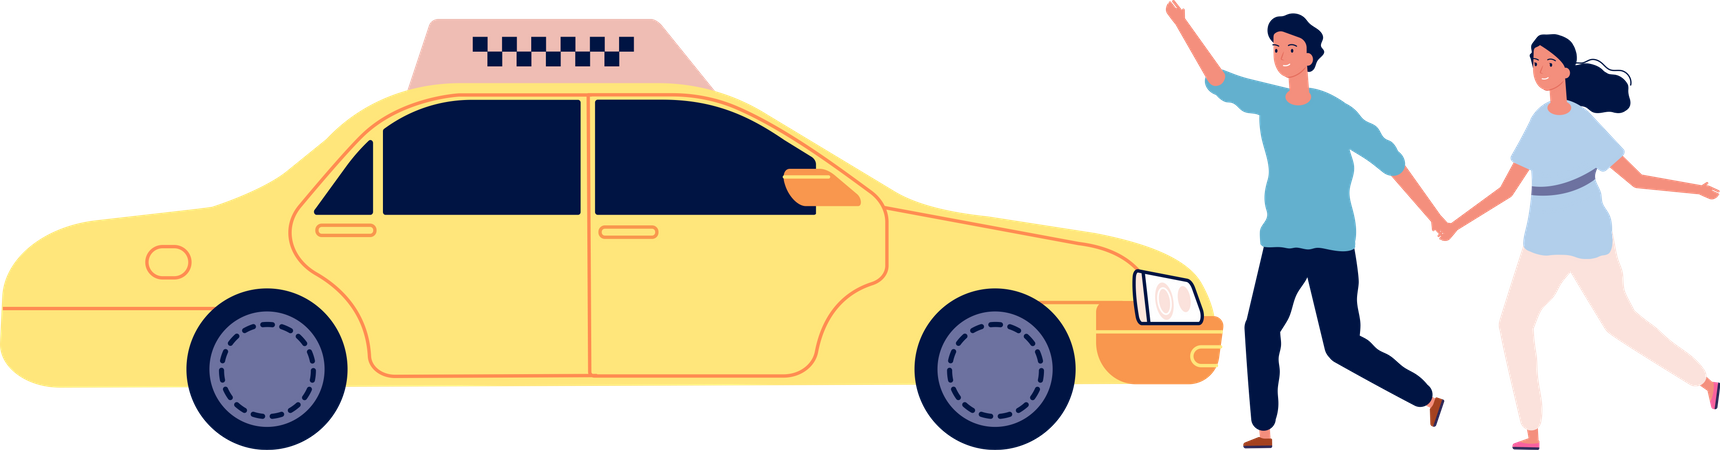 Couple call taxi Illustration